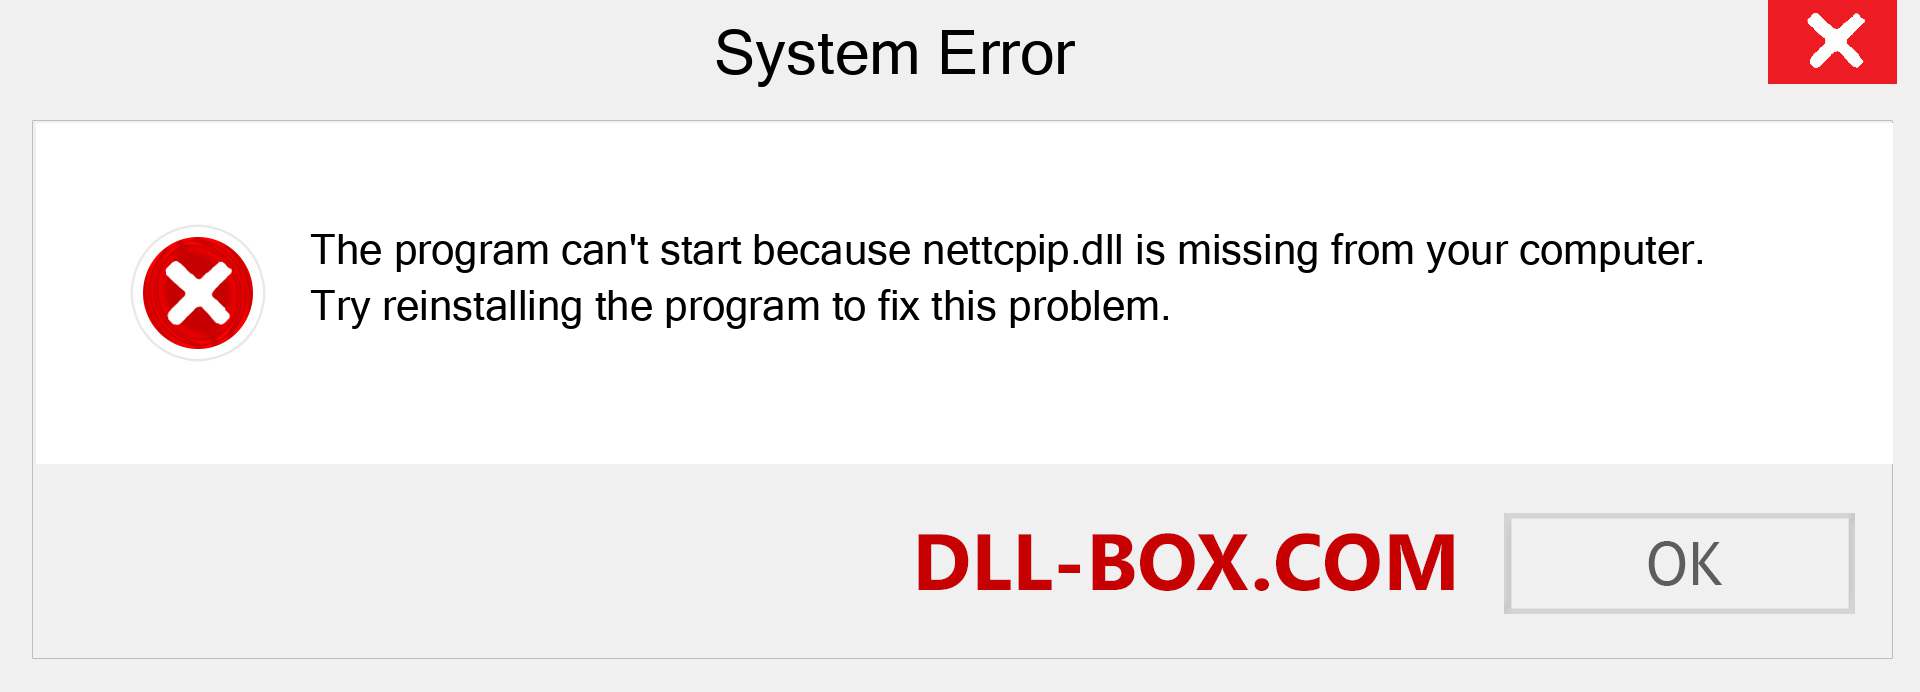  nettcpip.dll file is missing?. Download for Windows 7, 8, 10 - Fix  nettcpip dll Missing Error on Windows, photos, images